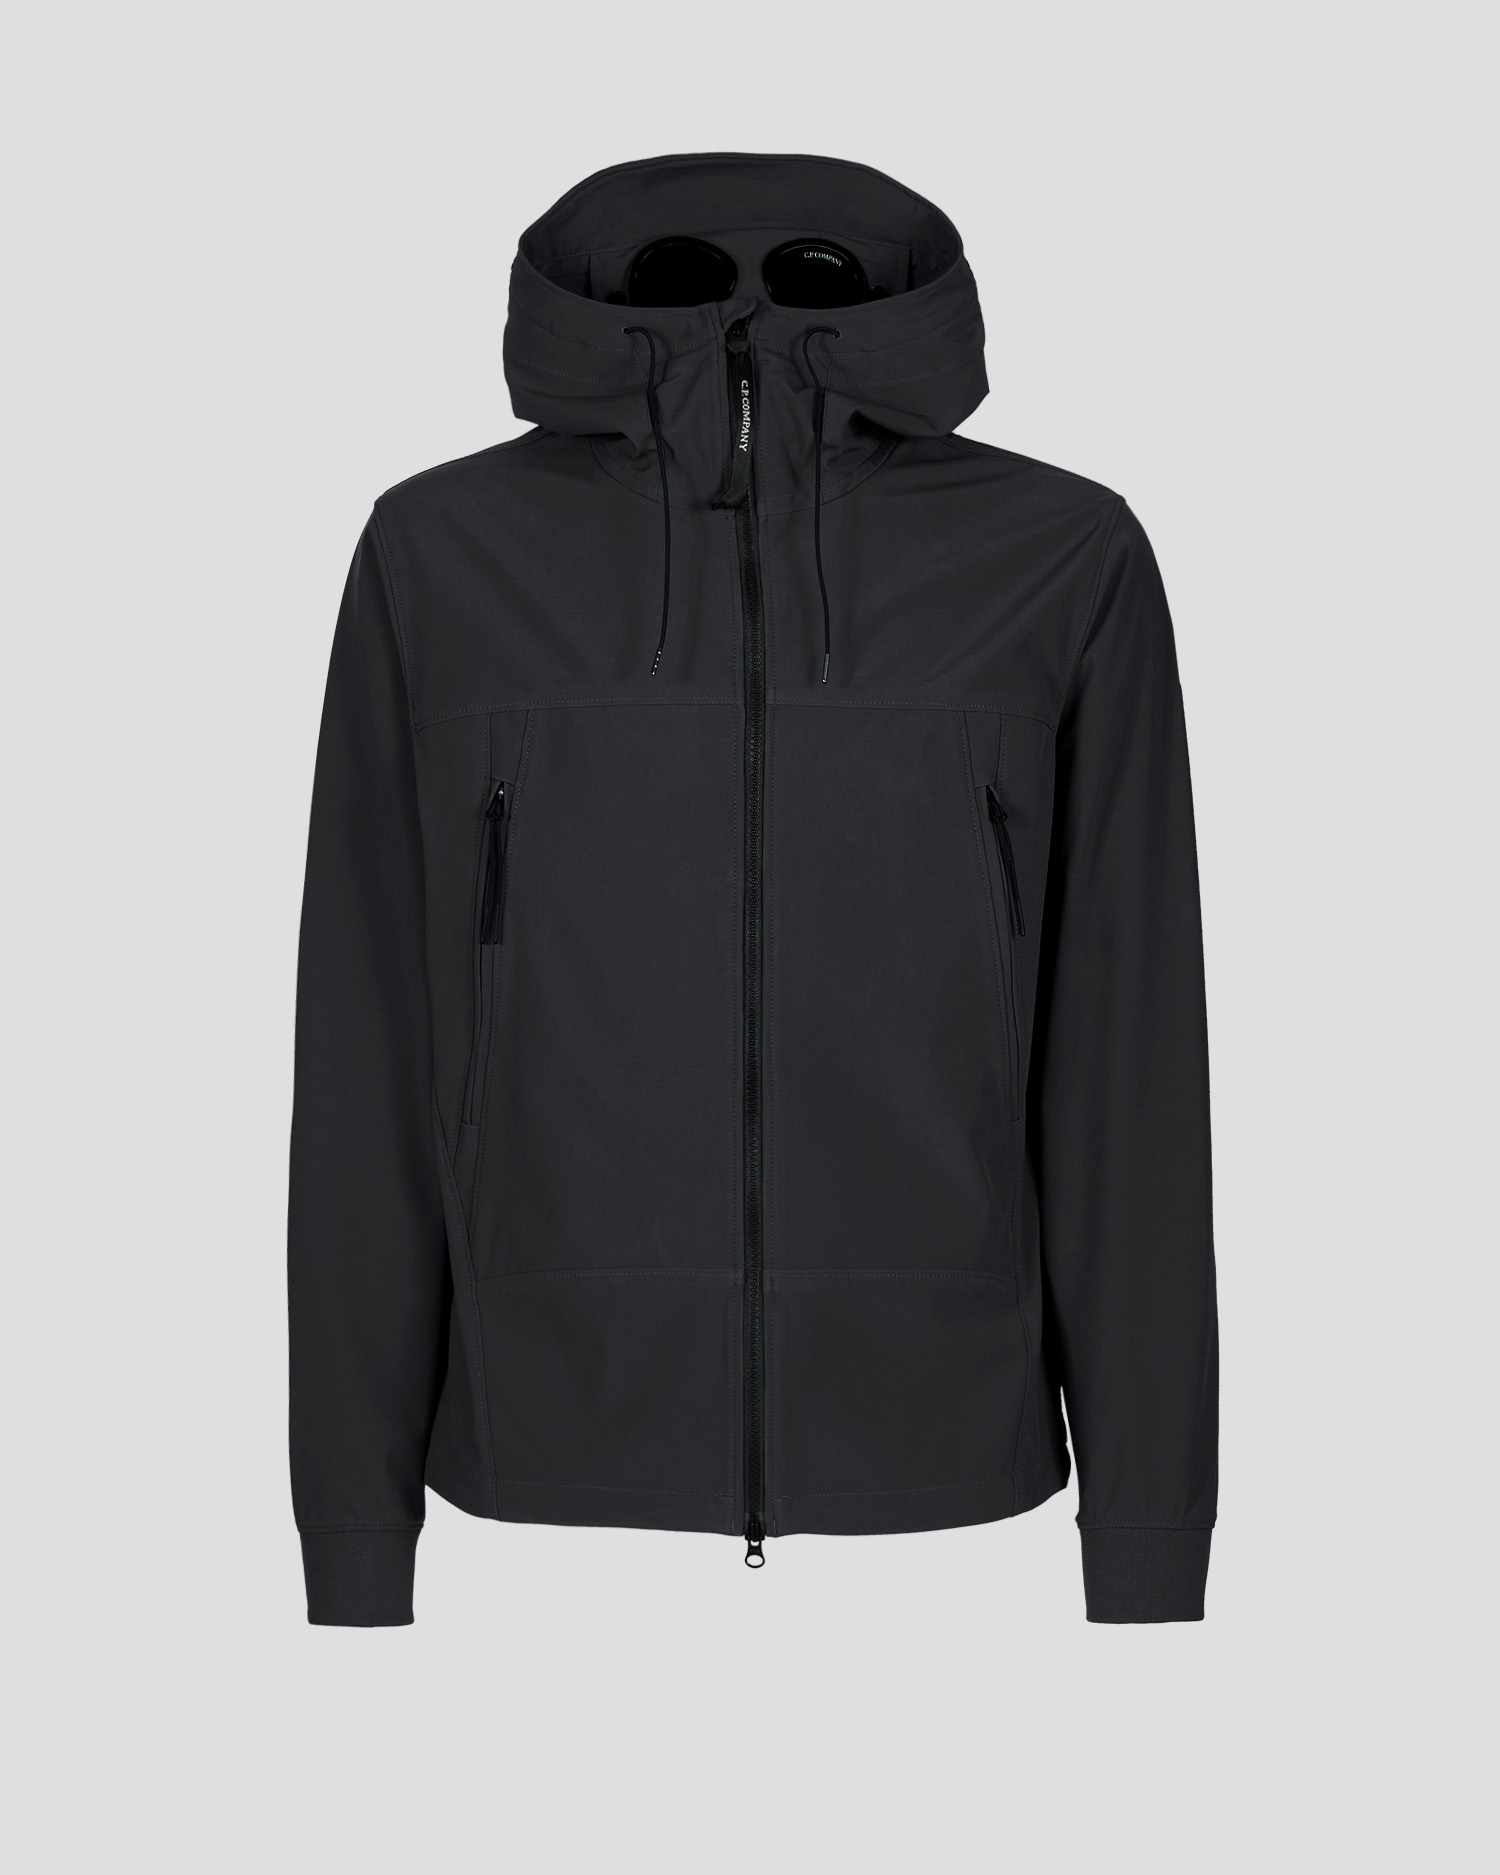 C.P. Shell-R Goggle Jacket | C.P. Company Online Store